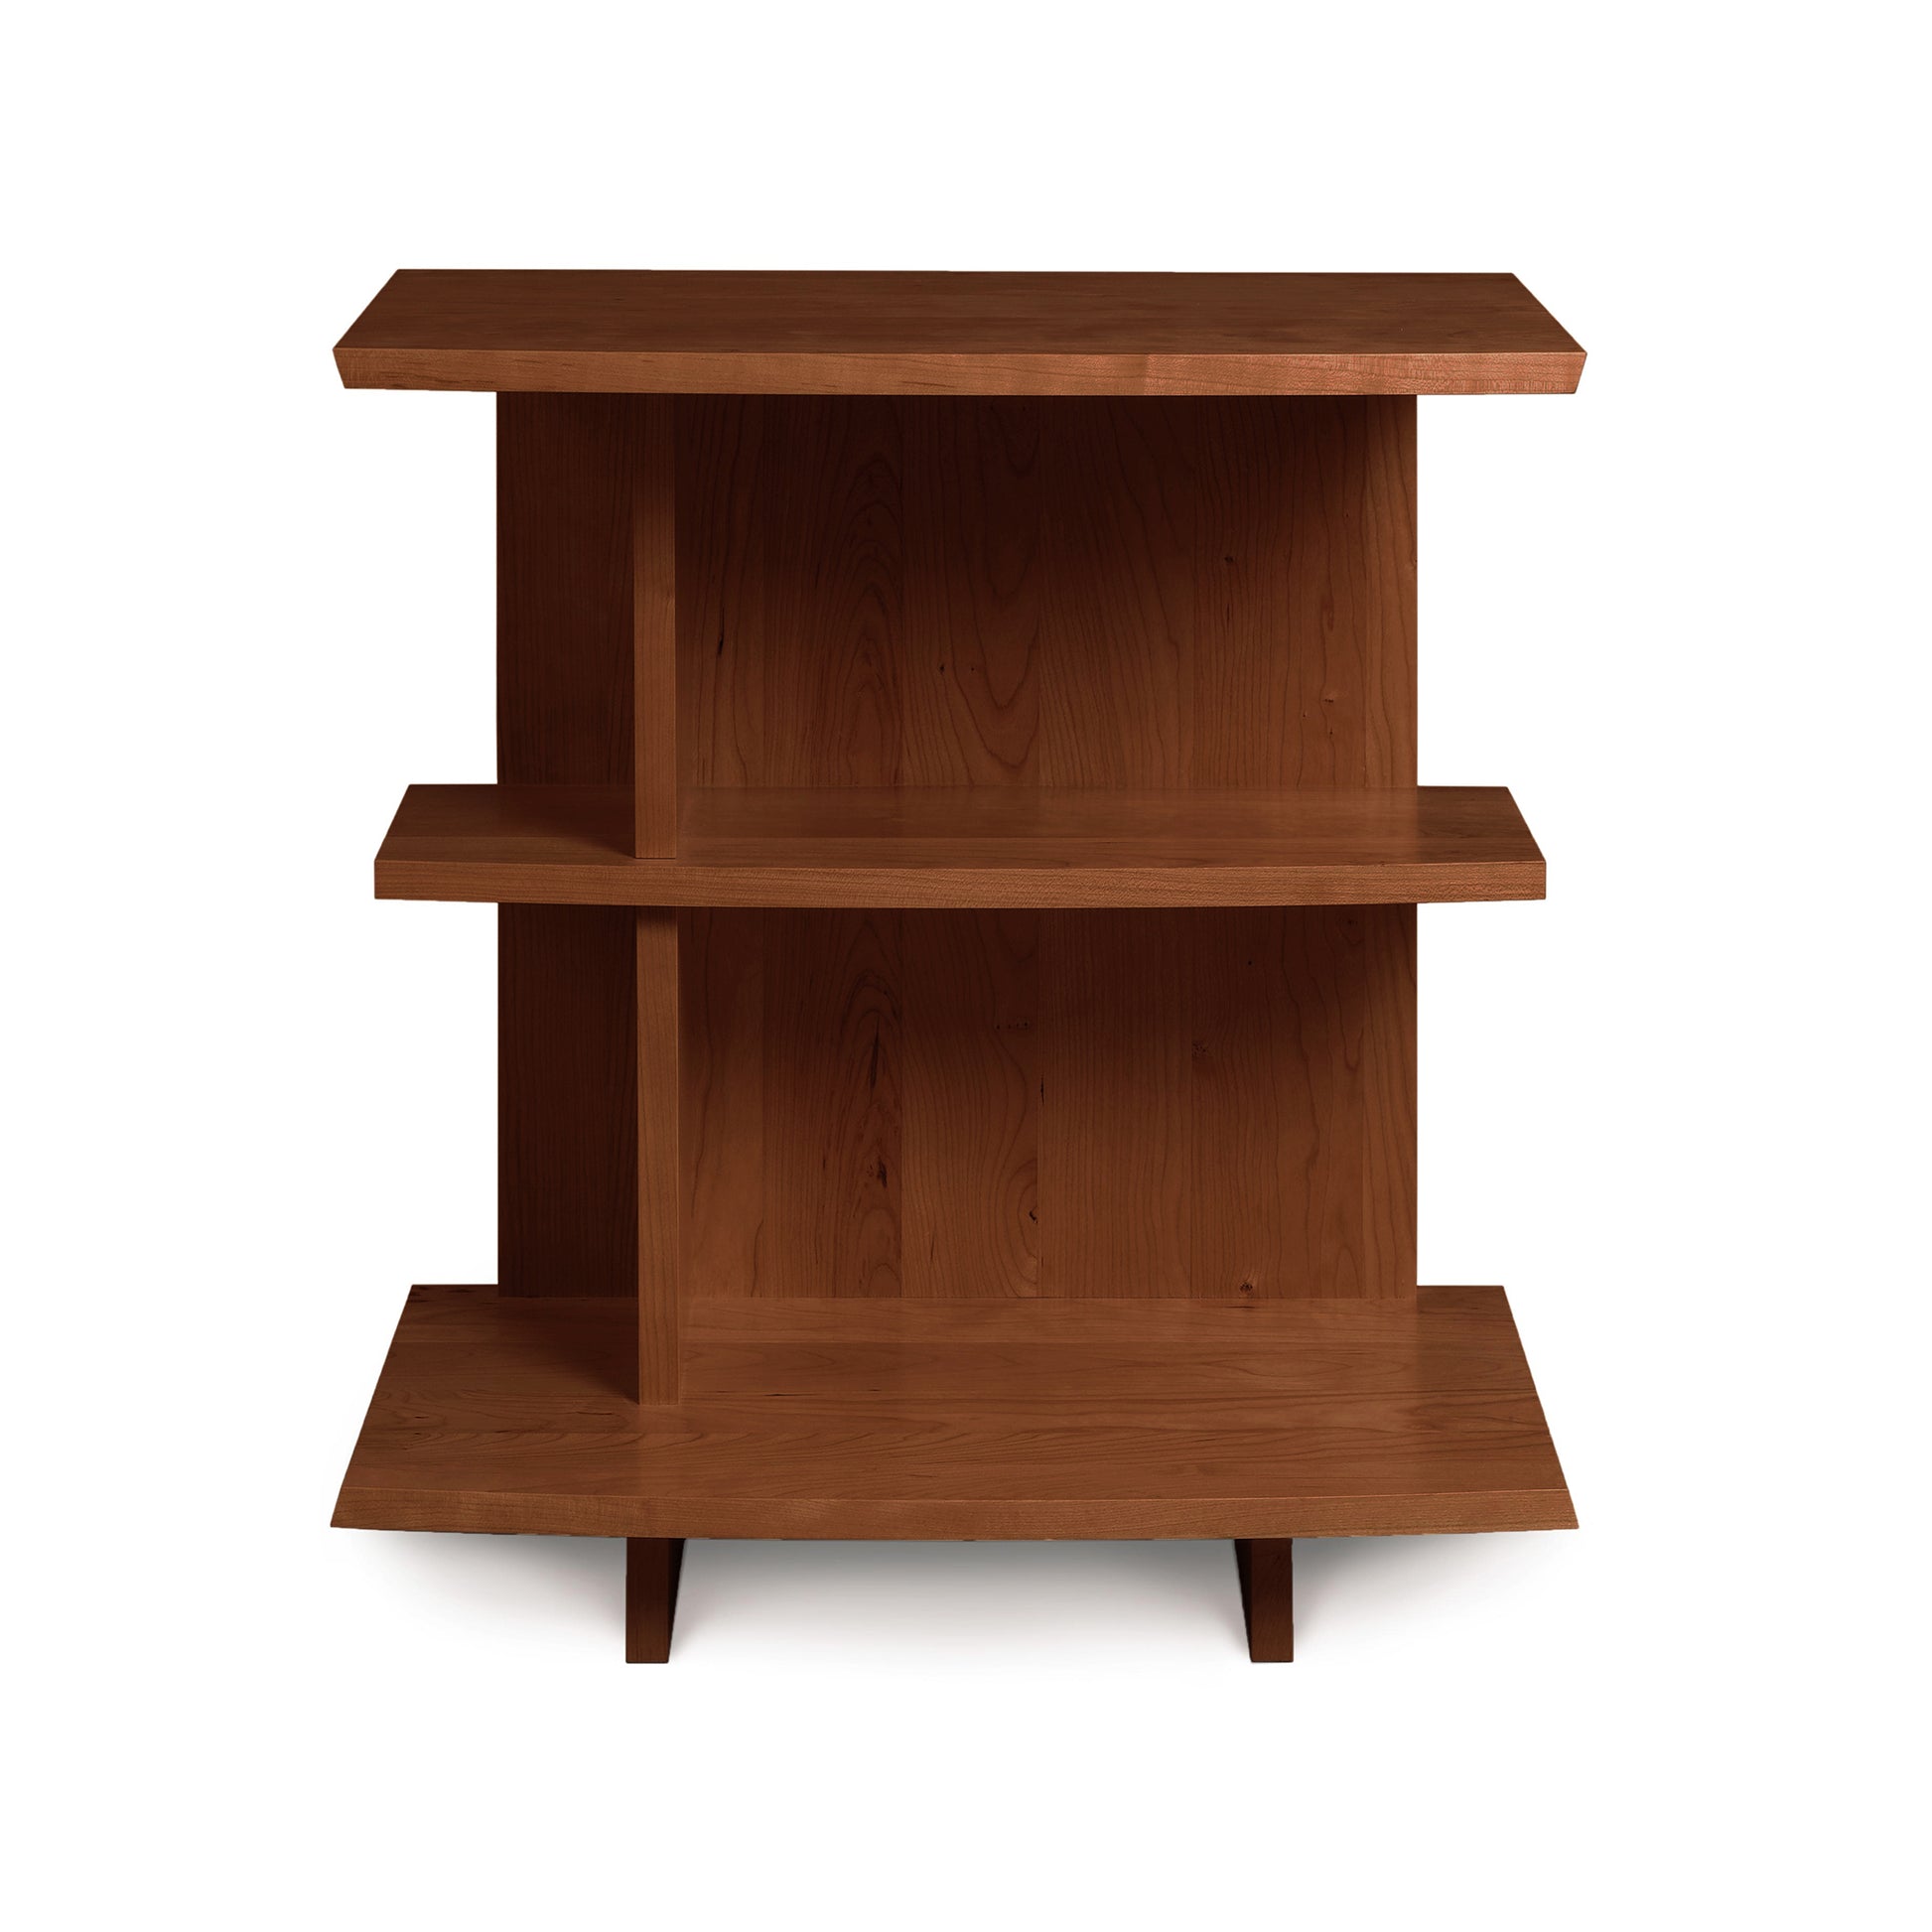 A Berkeley Open Shelf Nightstand - Left with two shelves on it by Copeland Furniture.